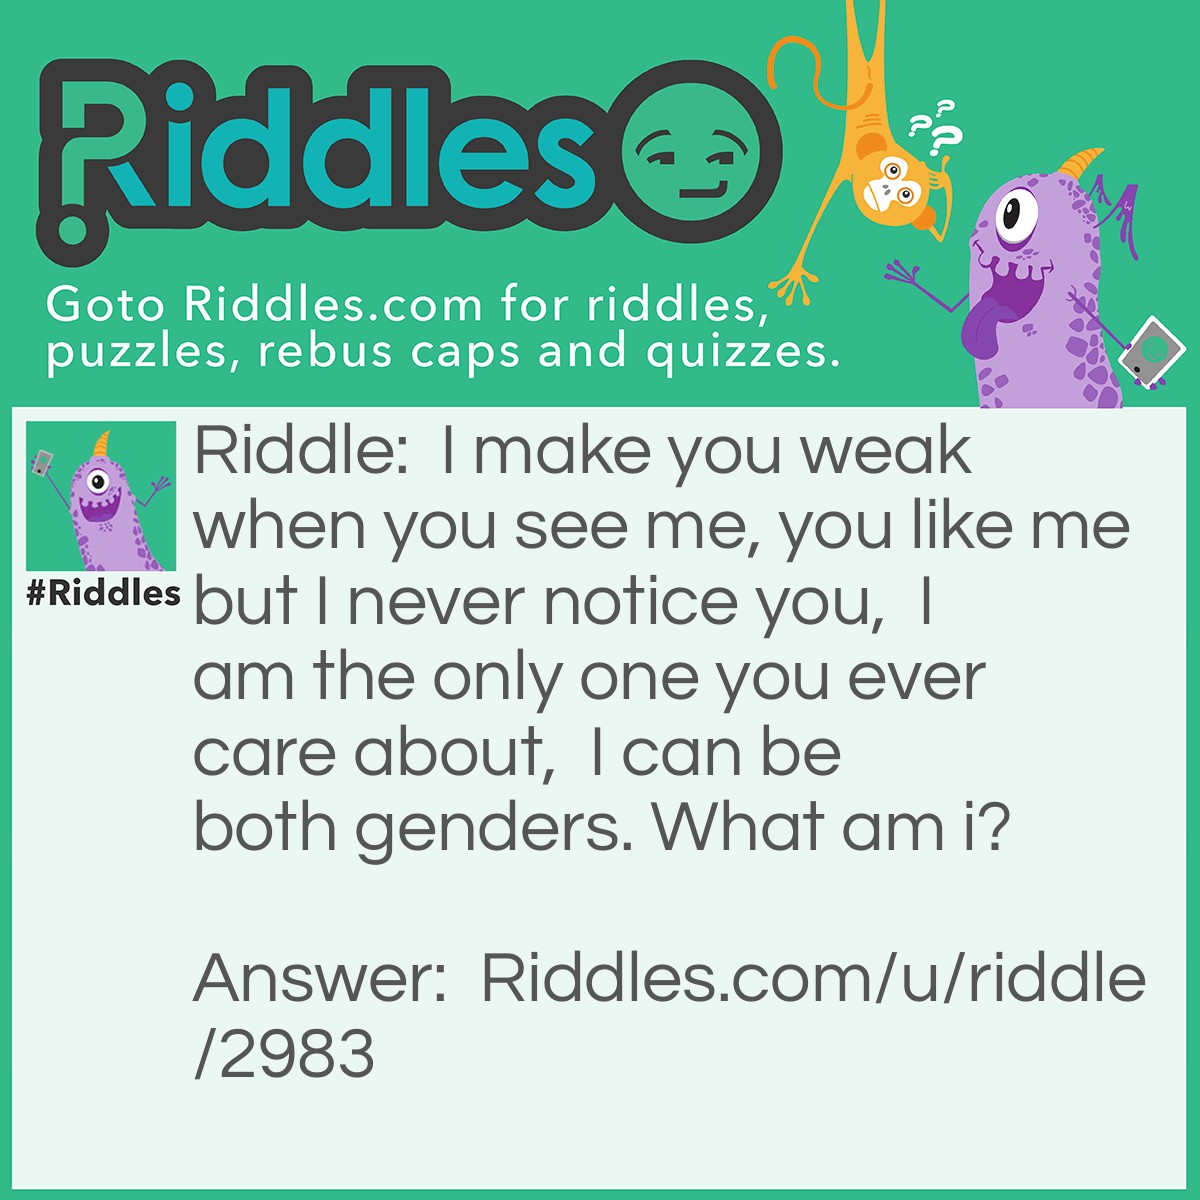 Riddle: I make you weak when you see me, you like me but I never notice you,  I am the only one you ever care about,  I can be both genders. What am i? Answer: Your crush.